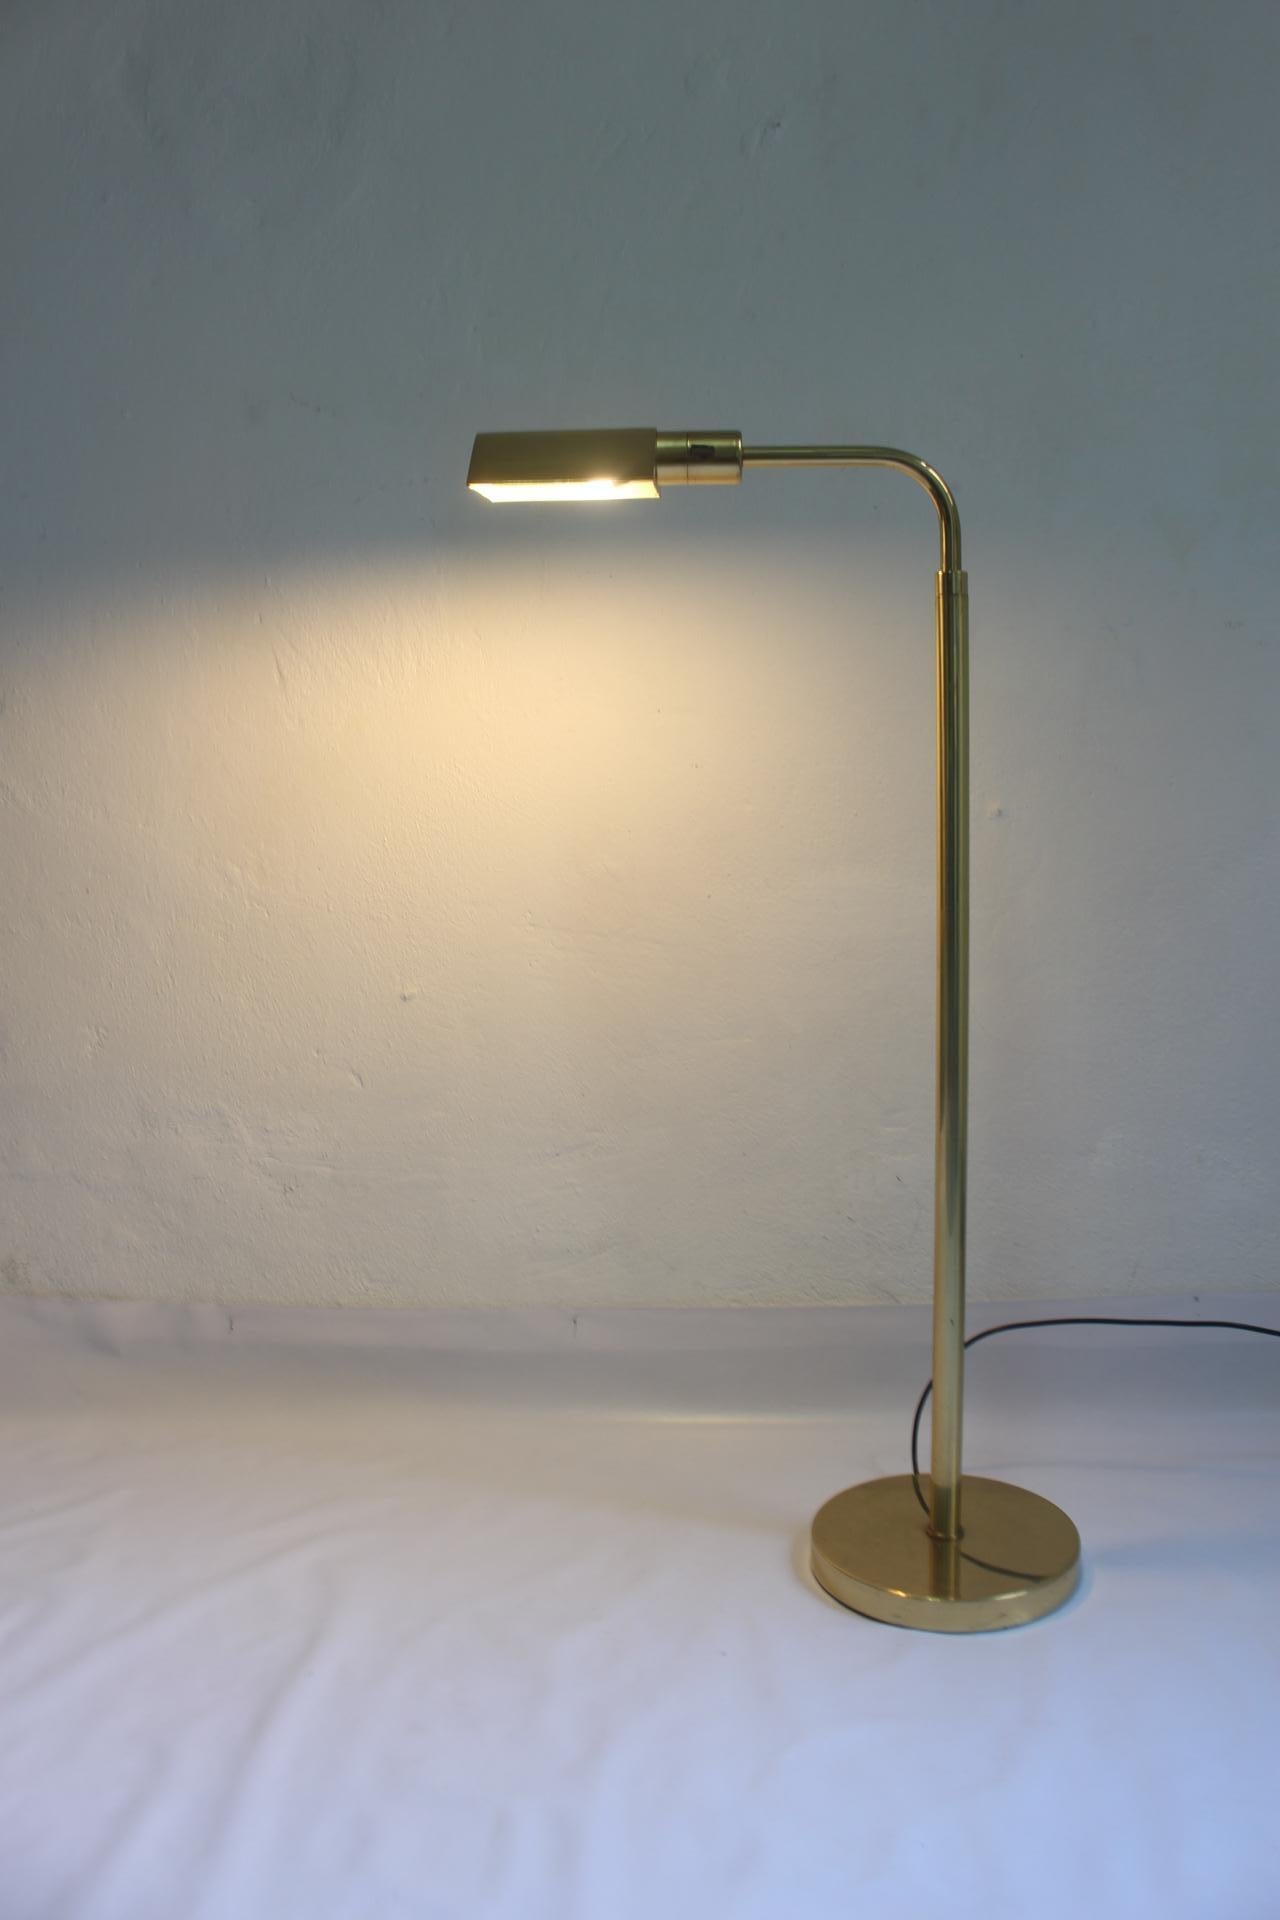 Articulated floor lamp designed by George W. Hansen in New York and produced by the prestigious Spanish lighting brand, Metalarte.
Adjustable height: 41.73-53.54 in / 106 -135 cm.